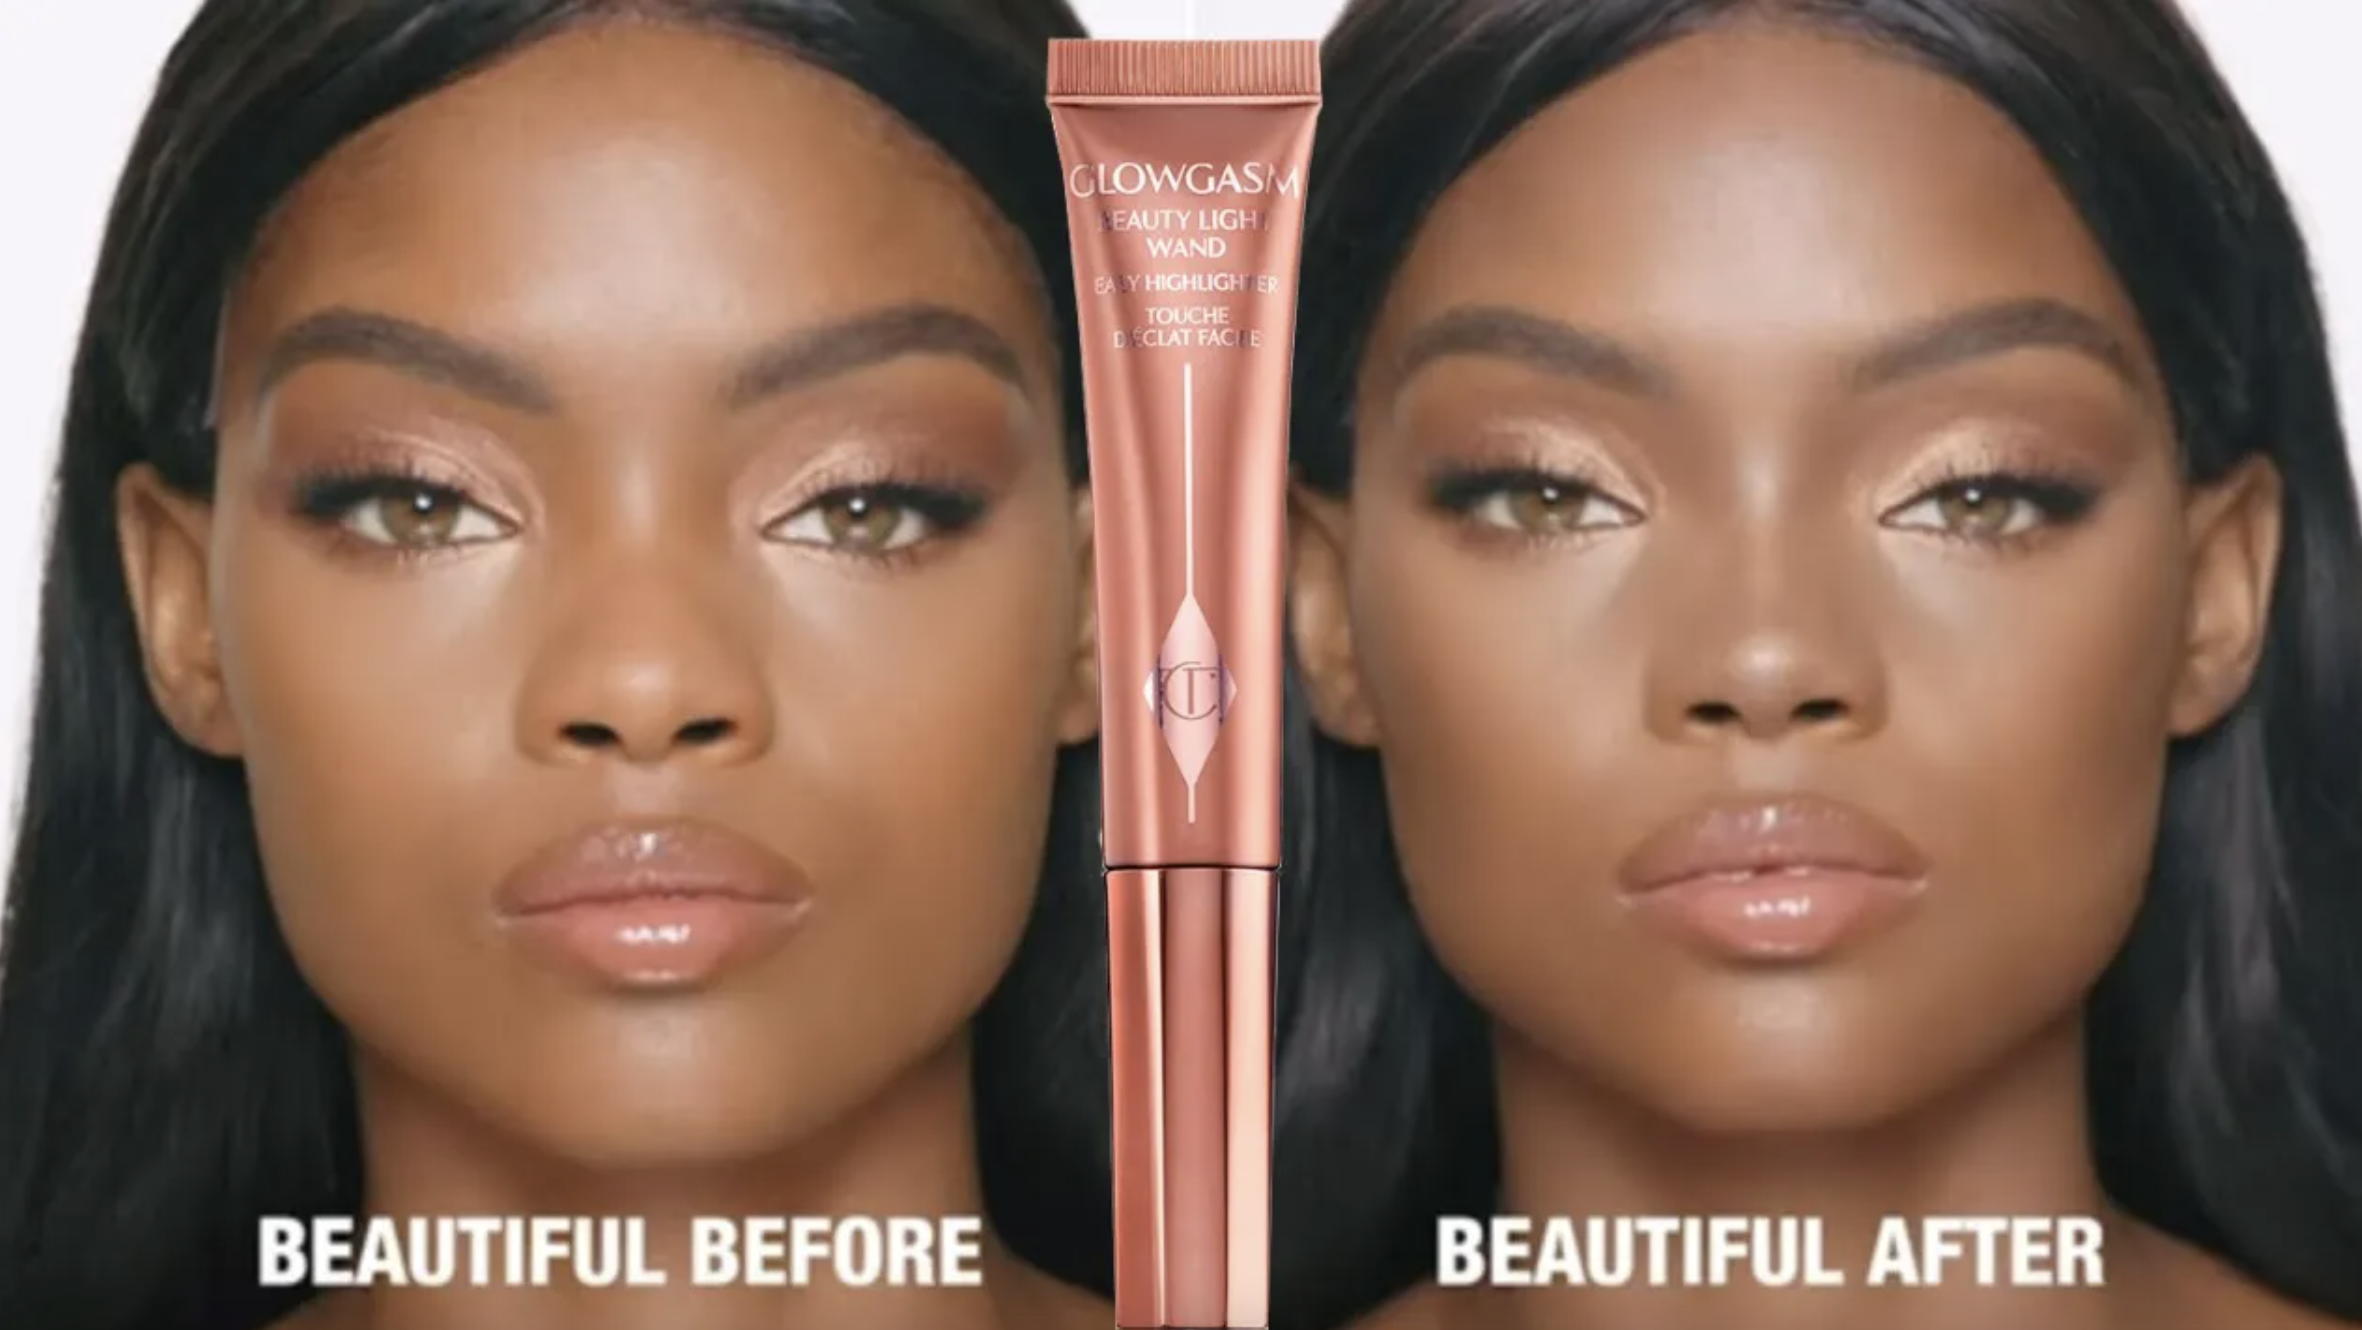 How To Contour & What Is Makeup Contouring, How-tos